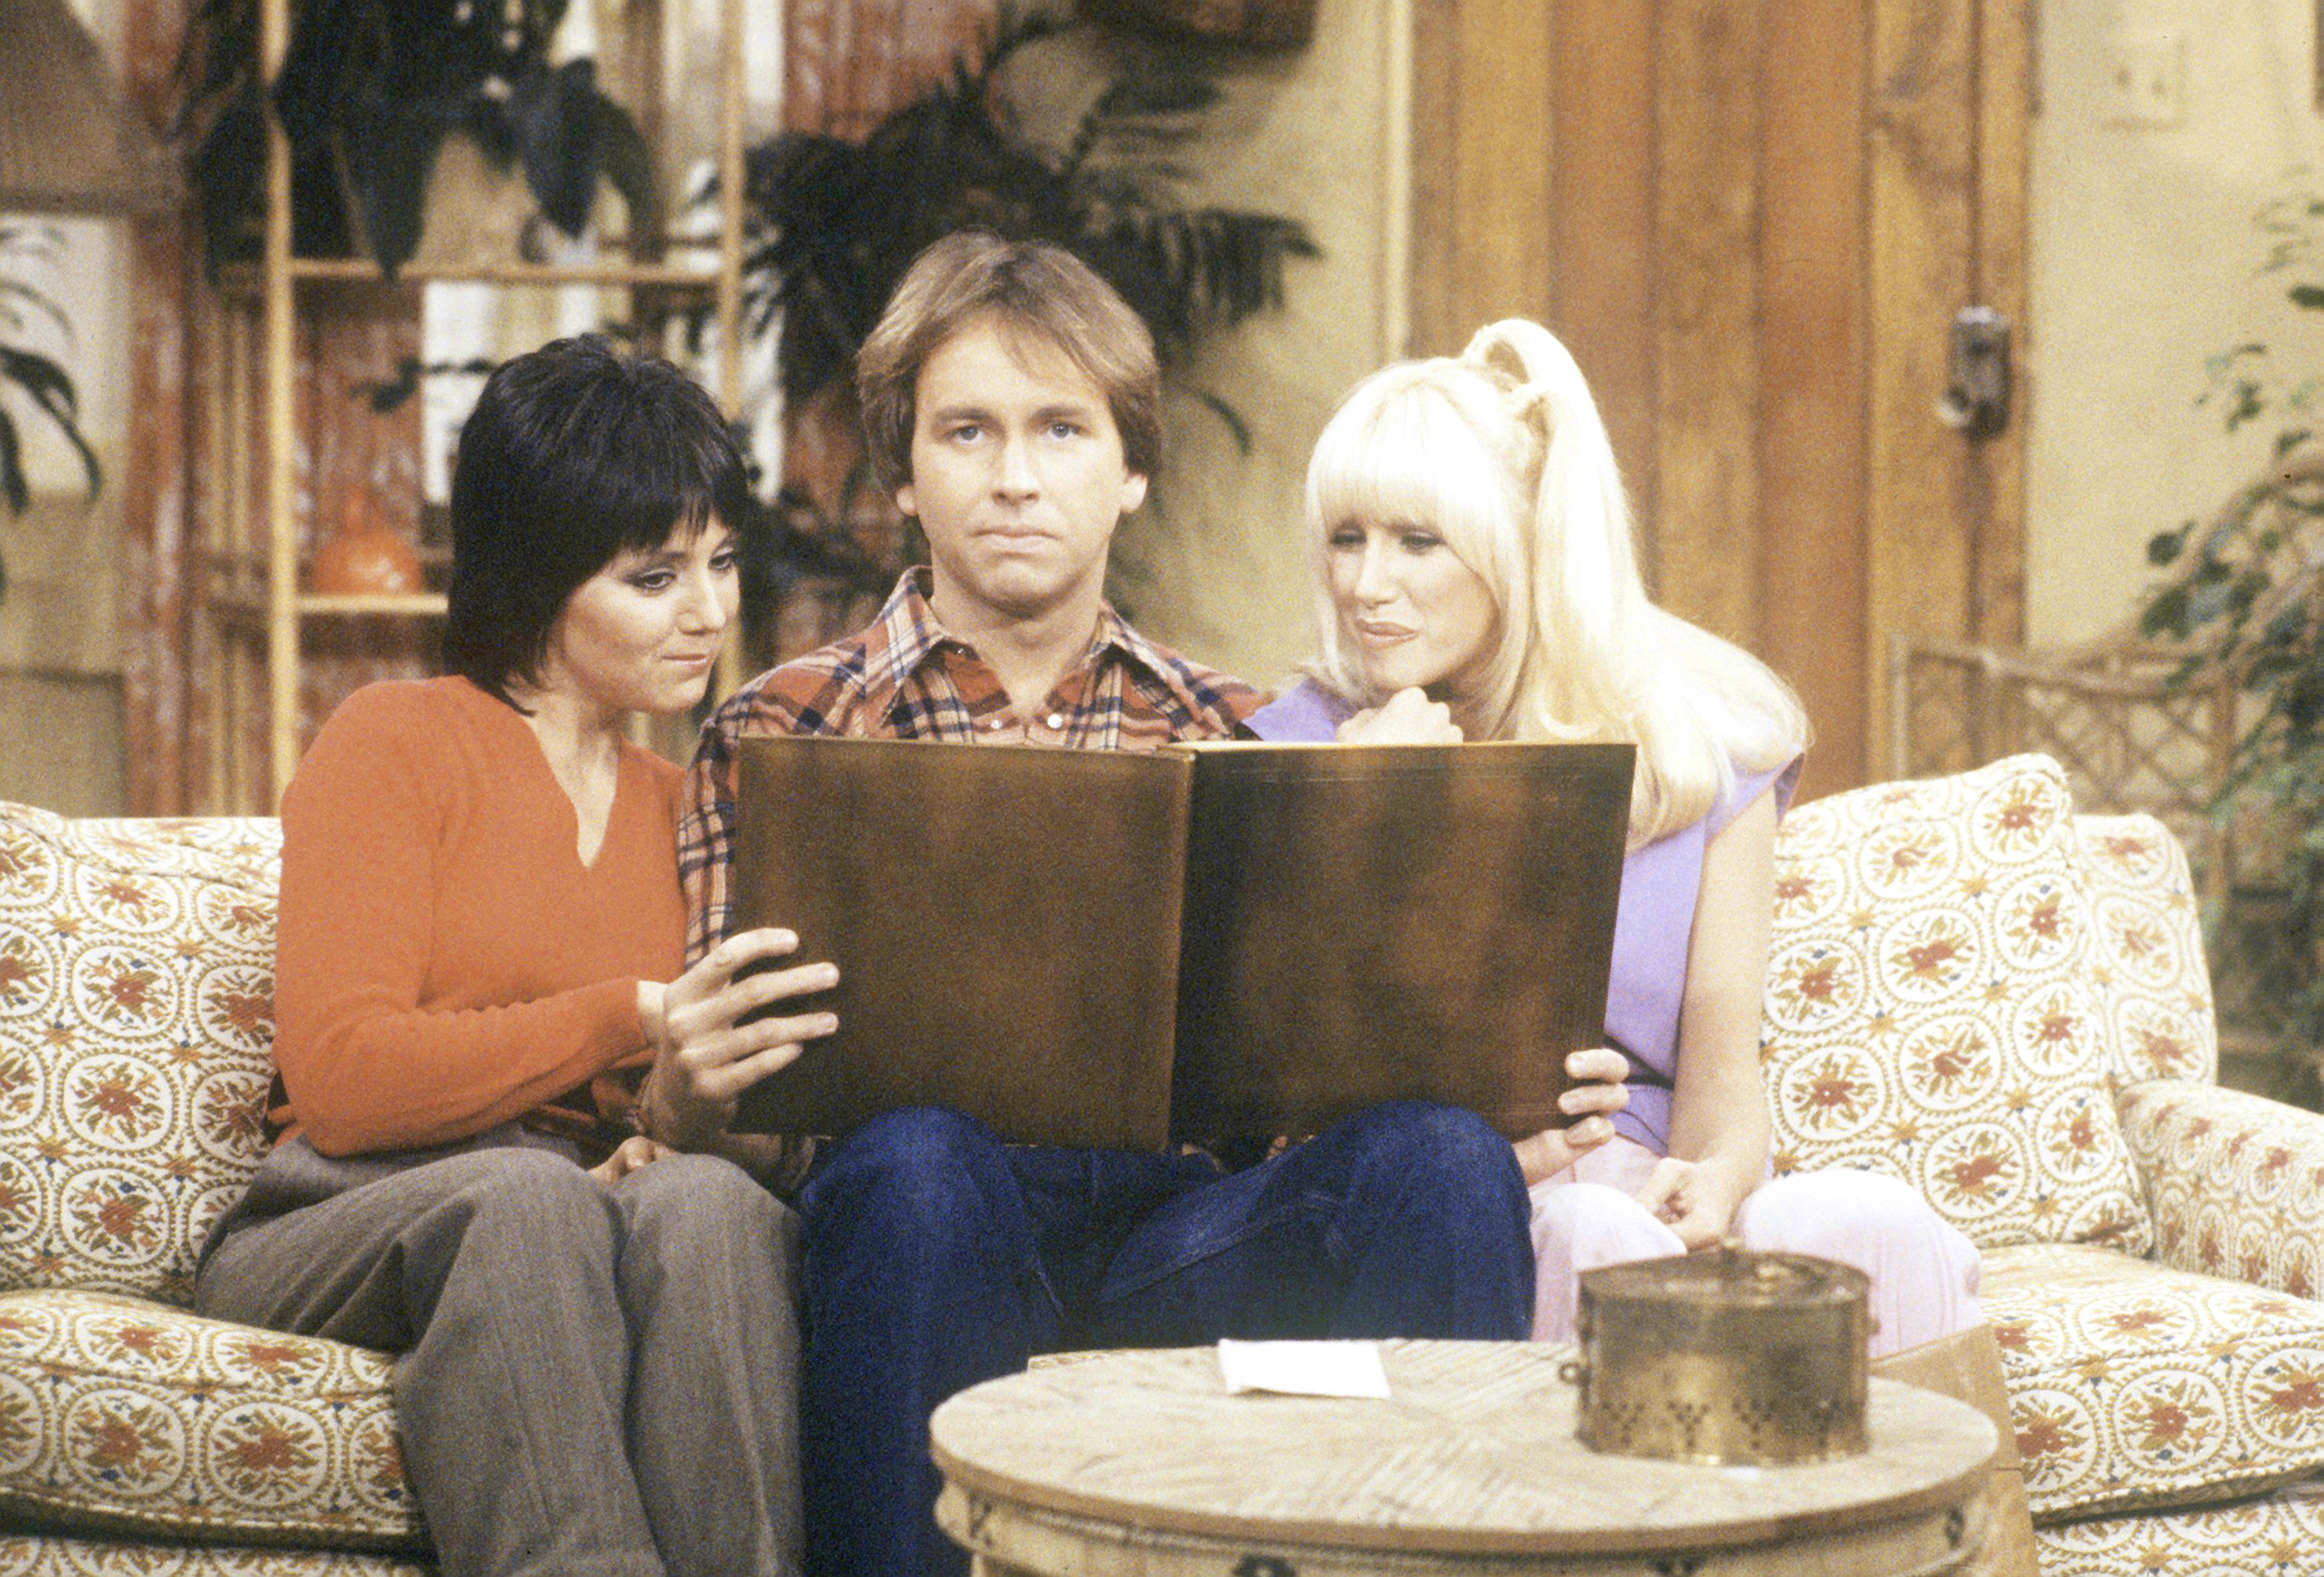 Joyce DeWitt, John Ritter, and Suzanne Somers in California in 1980 | Source: Getty Images